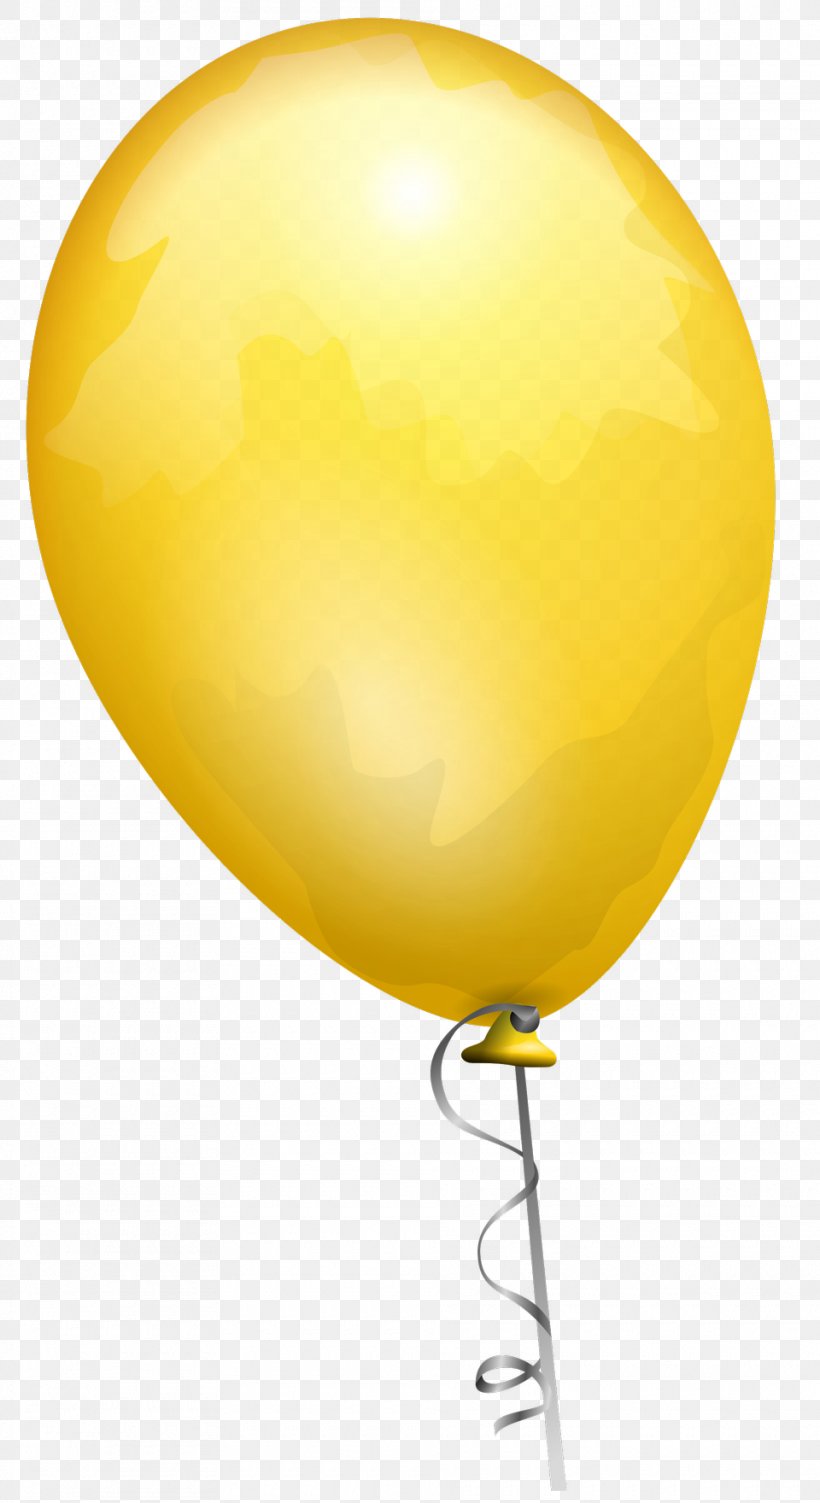 Balloon Clip Art, PNG, 960x1760px, Balloon, Balloon Light, Balloon Modelling, Color, Image File Formats Download Free